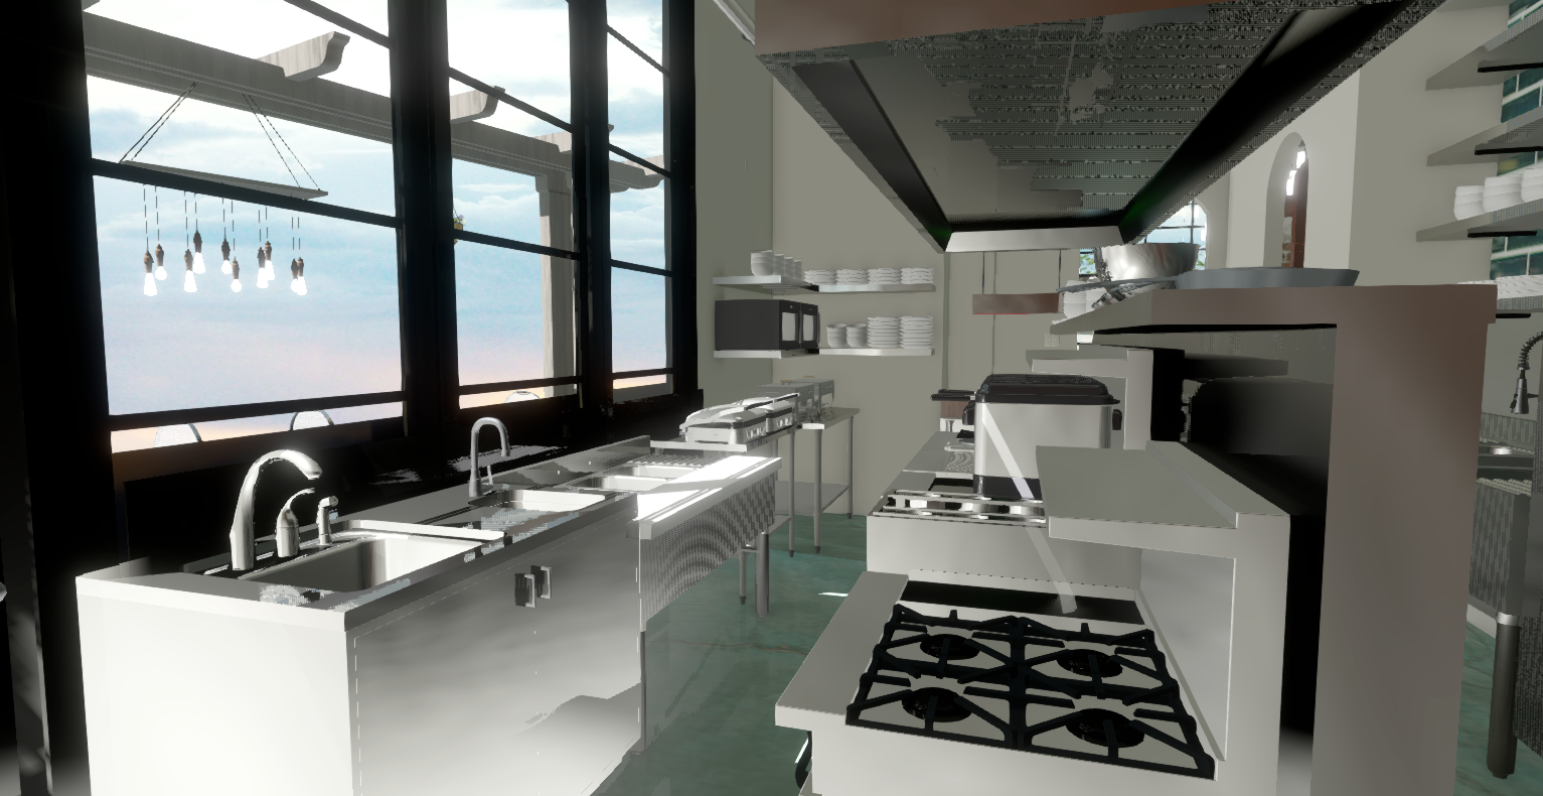 An animated render of the brightly lit and modern kitchen at the new Soul de Cuba restaurant with large windows and modern touches, designed by Creative Touch Interiors.